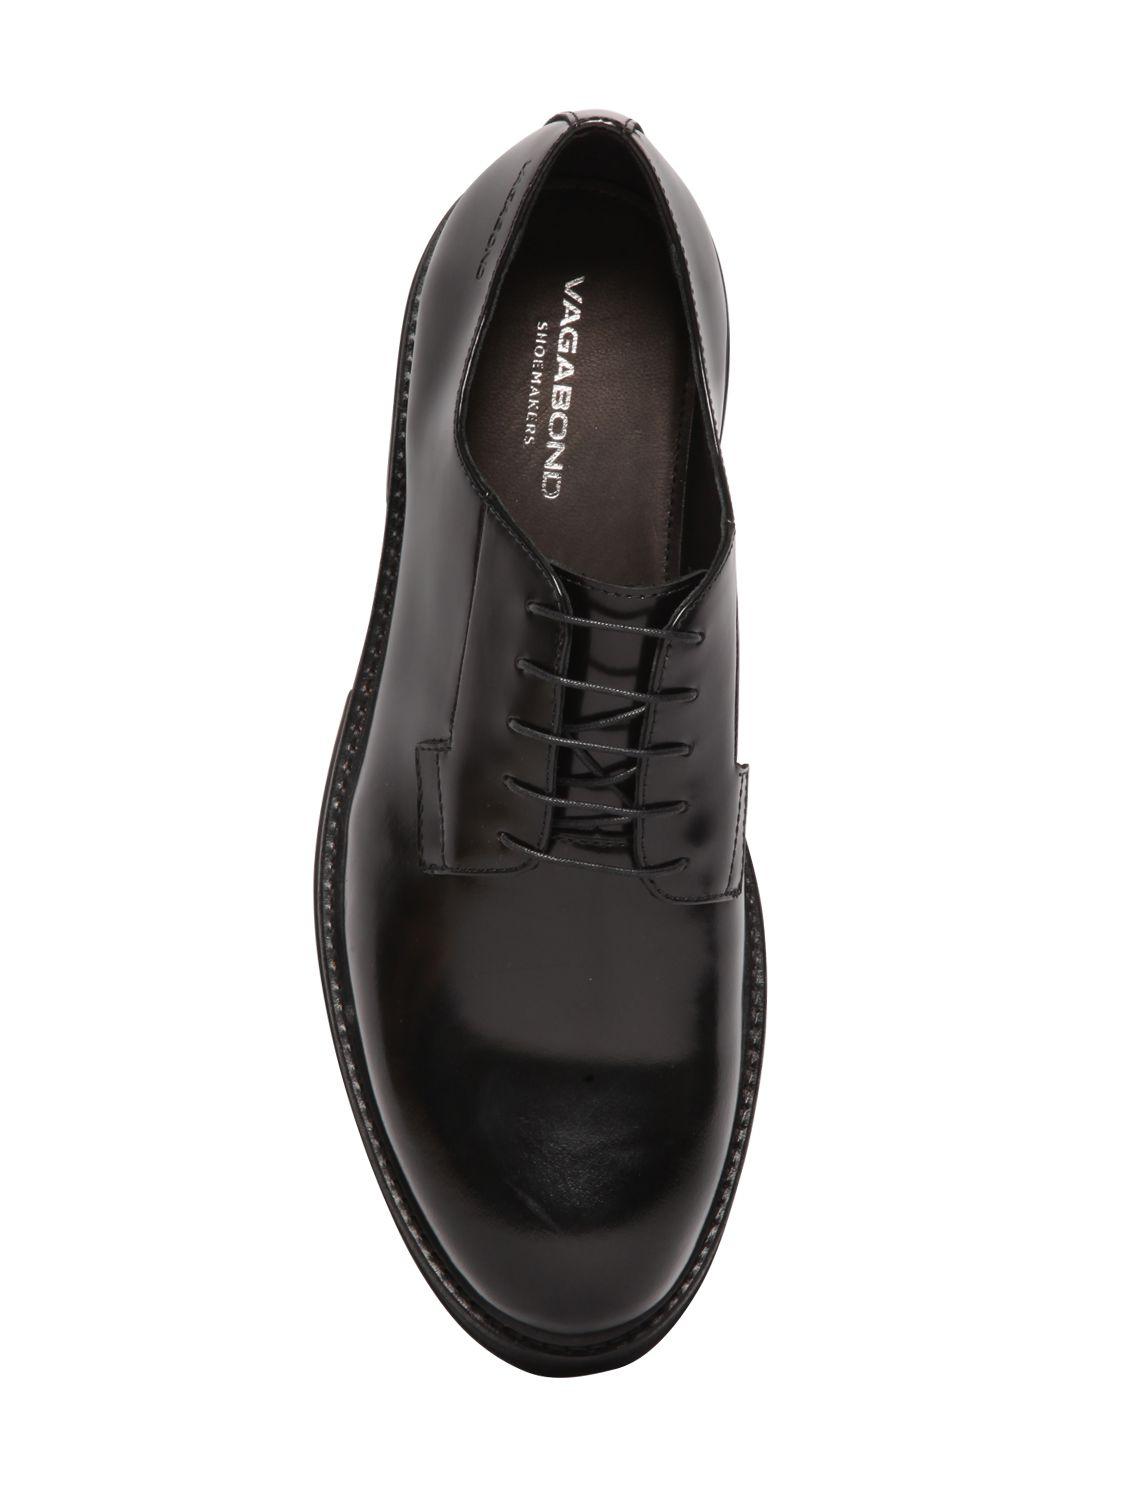 Vagabond Giorgi Leather Derby Shoes in for - Lyst